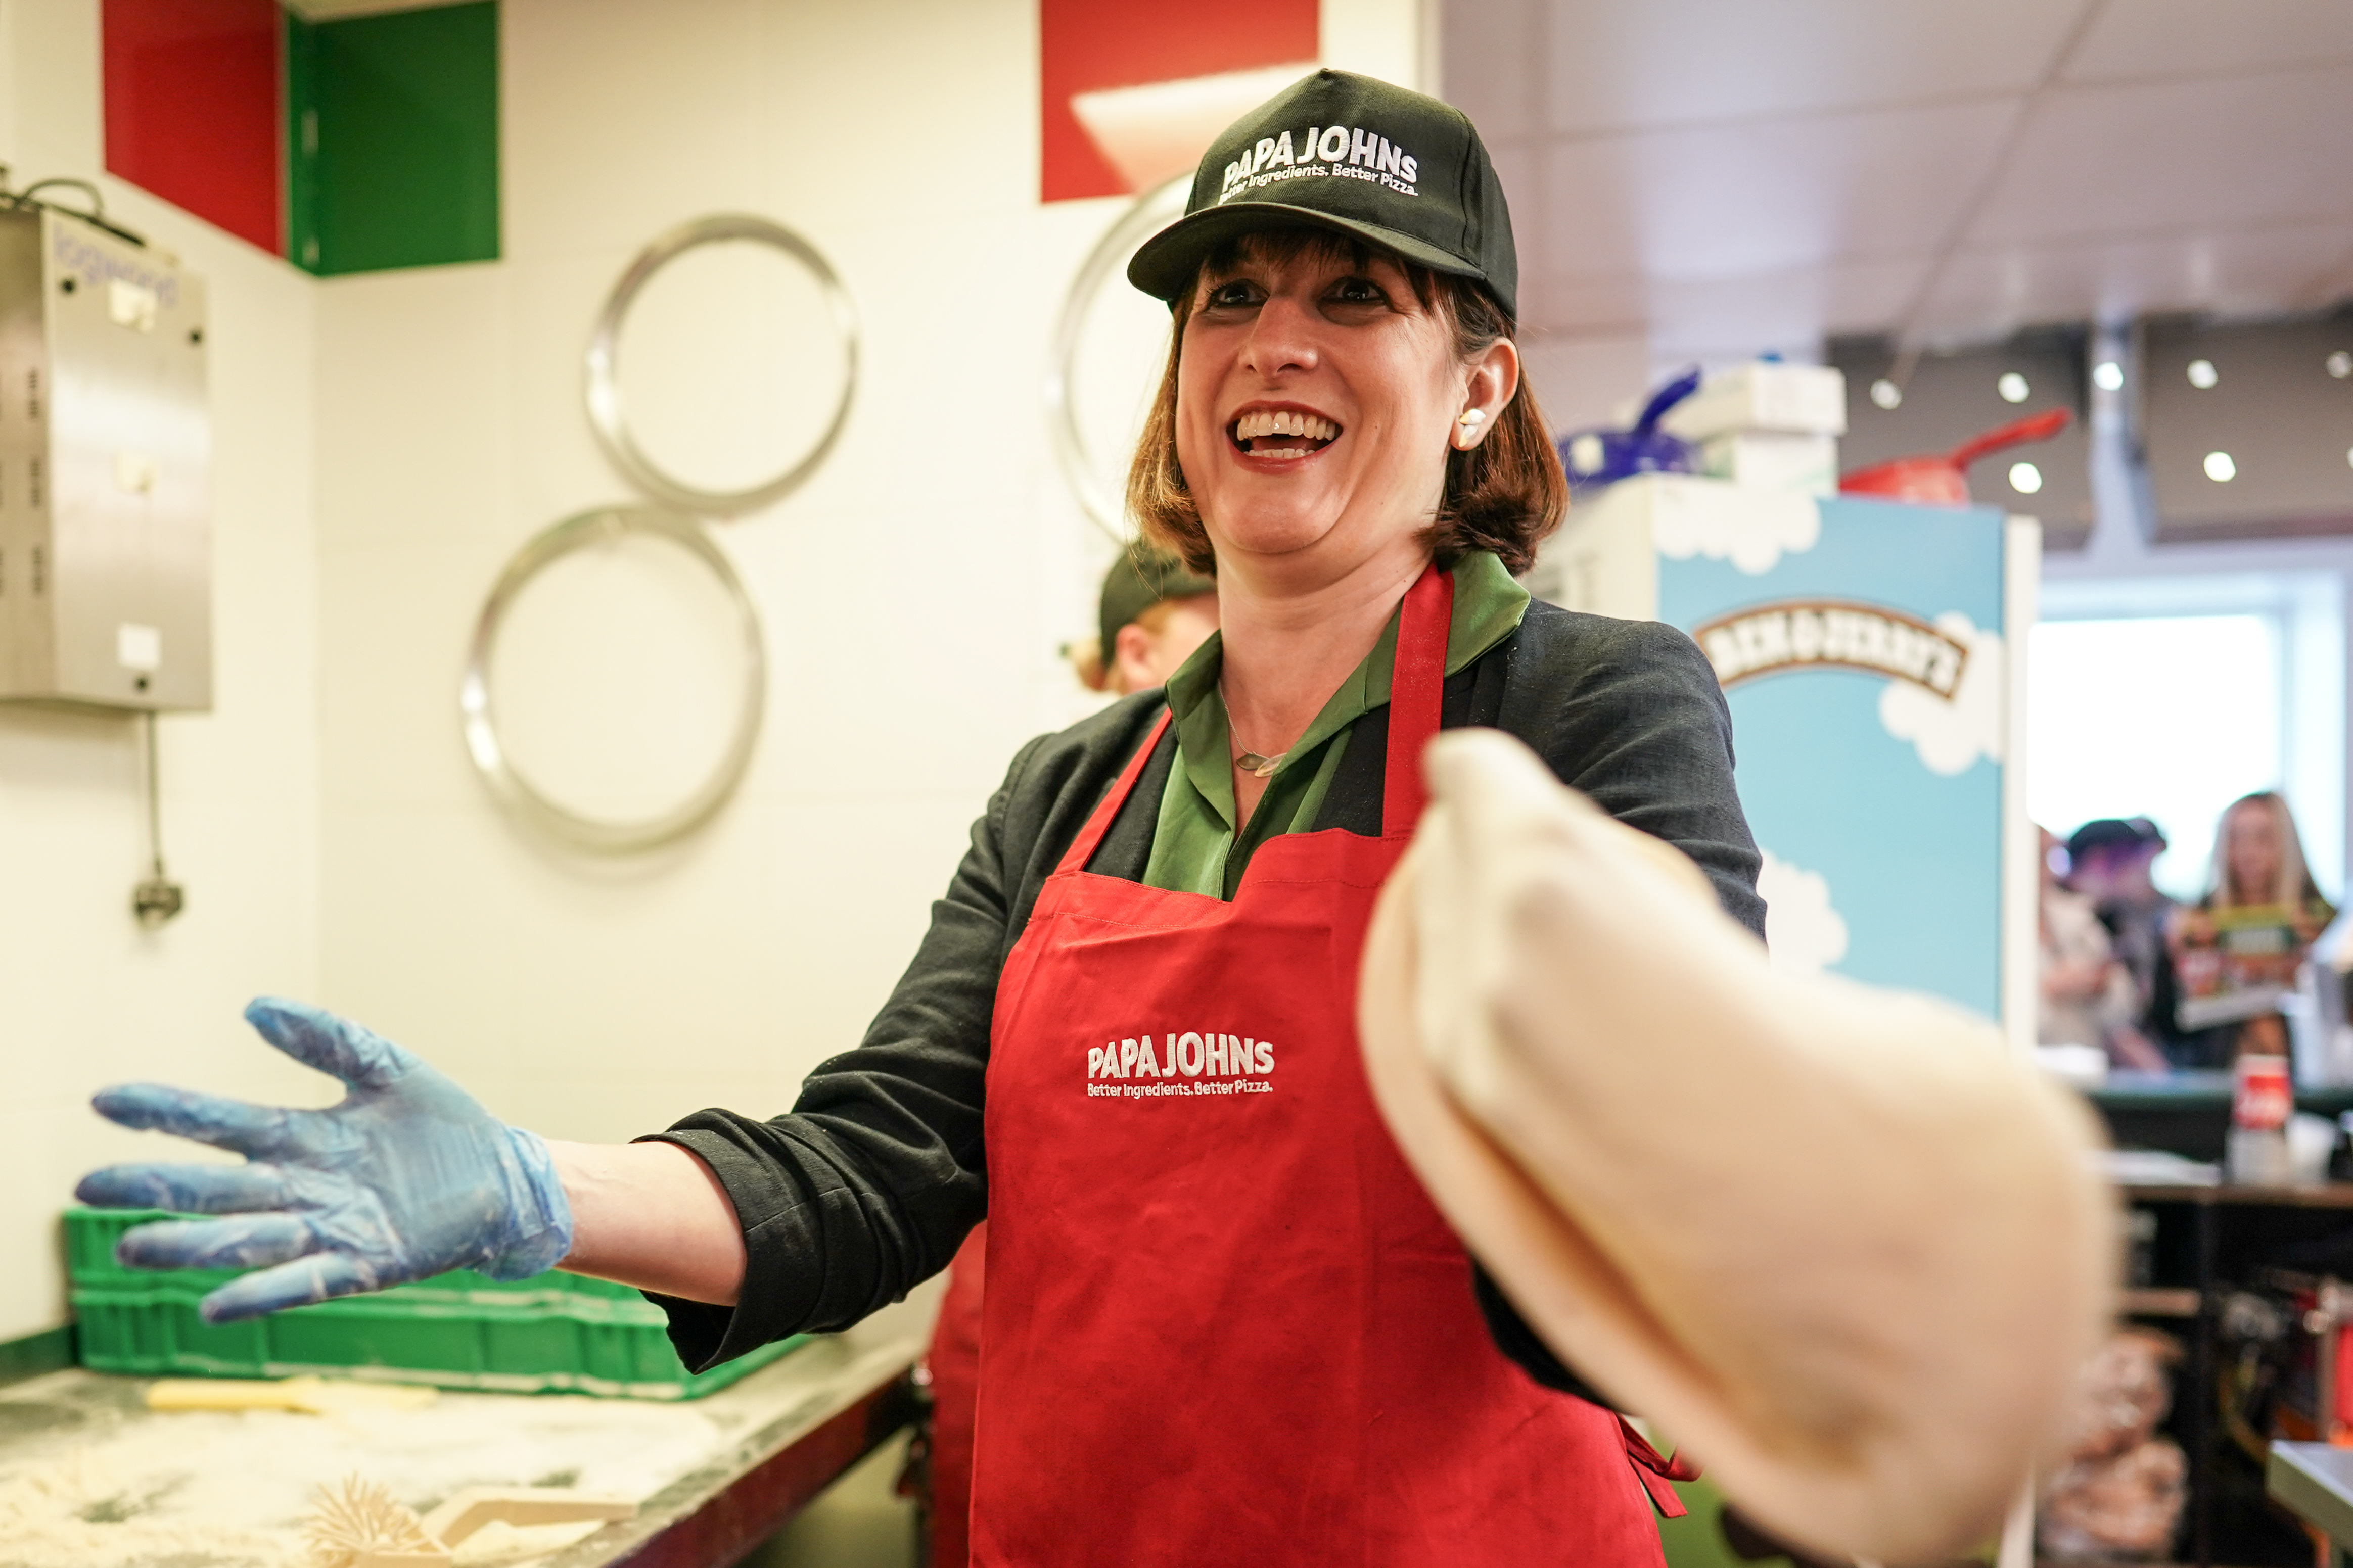 Rachel Reeves, Labour's Shadow Chancellor of the Exchequer, makes pizza in the Papa Johns restaurant during a visit to Primrose Valley Holiday Park